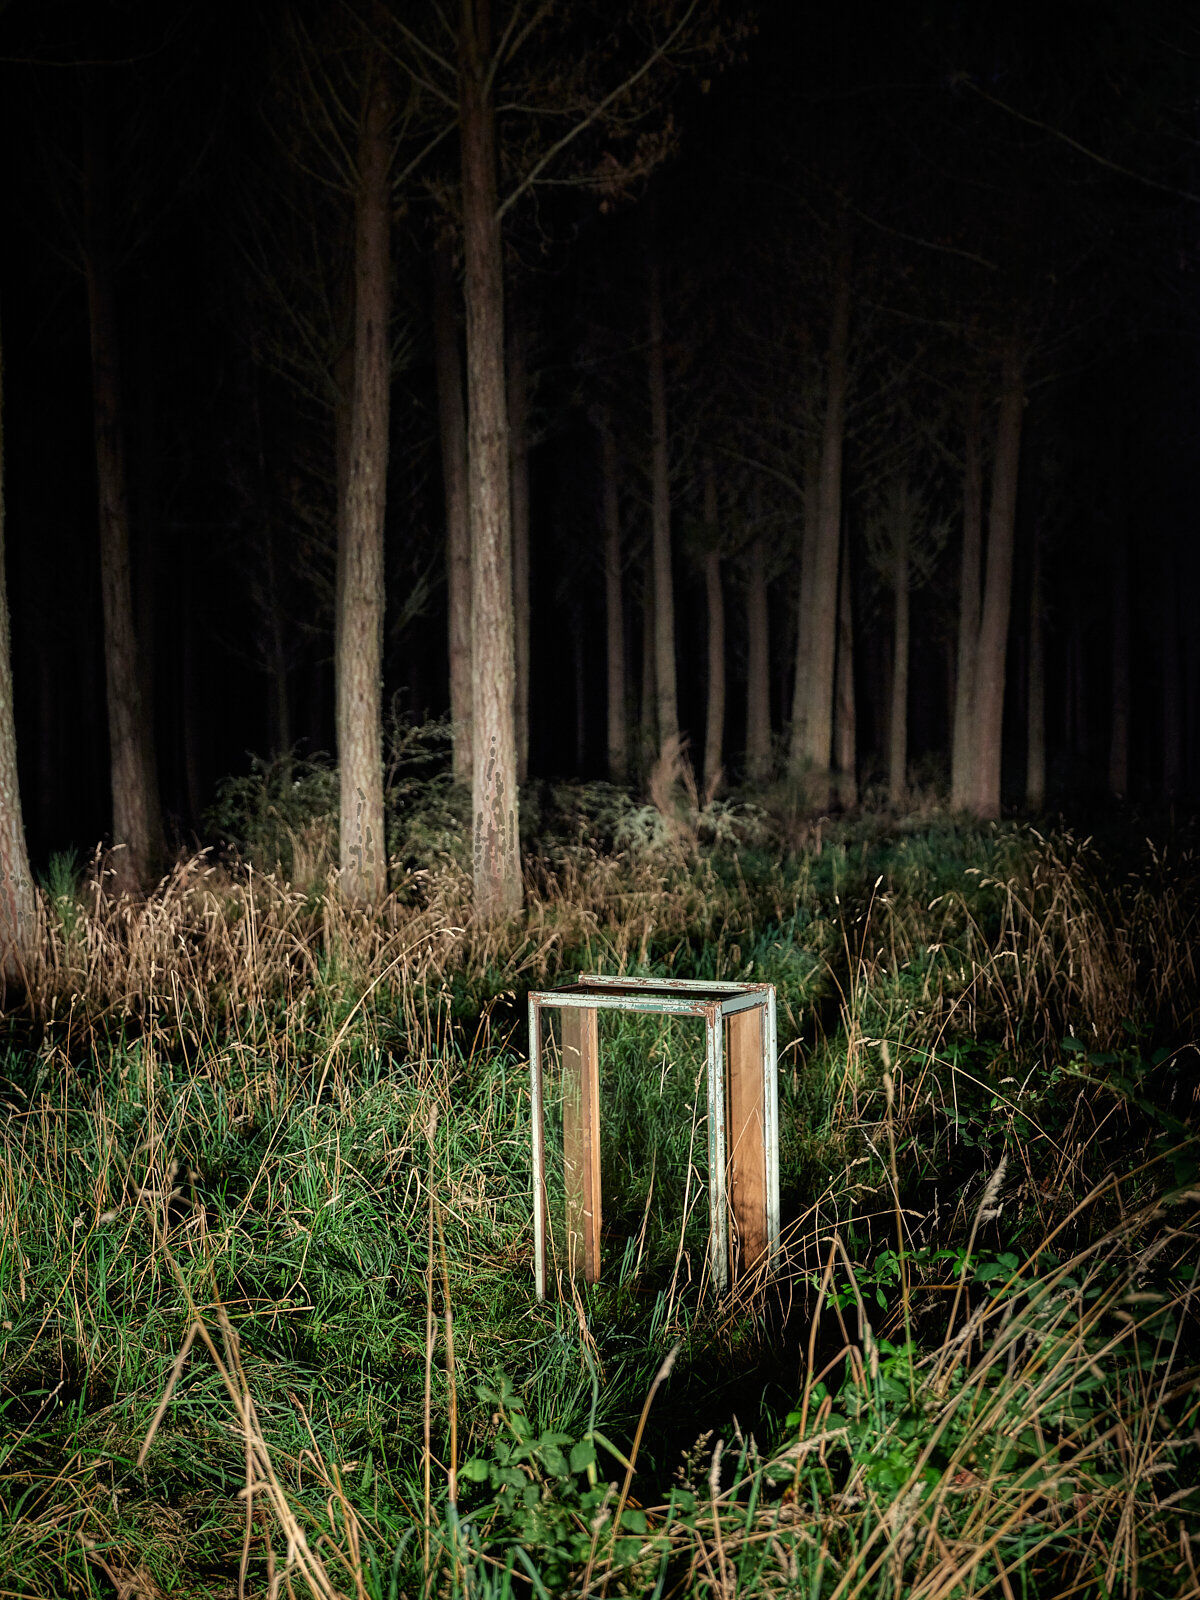   Dr Ward’s Case # 12, Kaimanawa Forest Park, Night, 2019, 1110mm x 850mm  